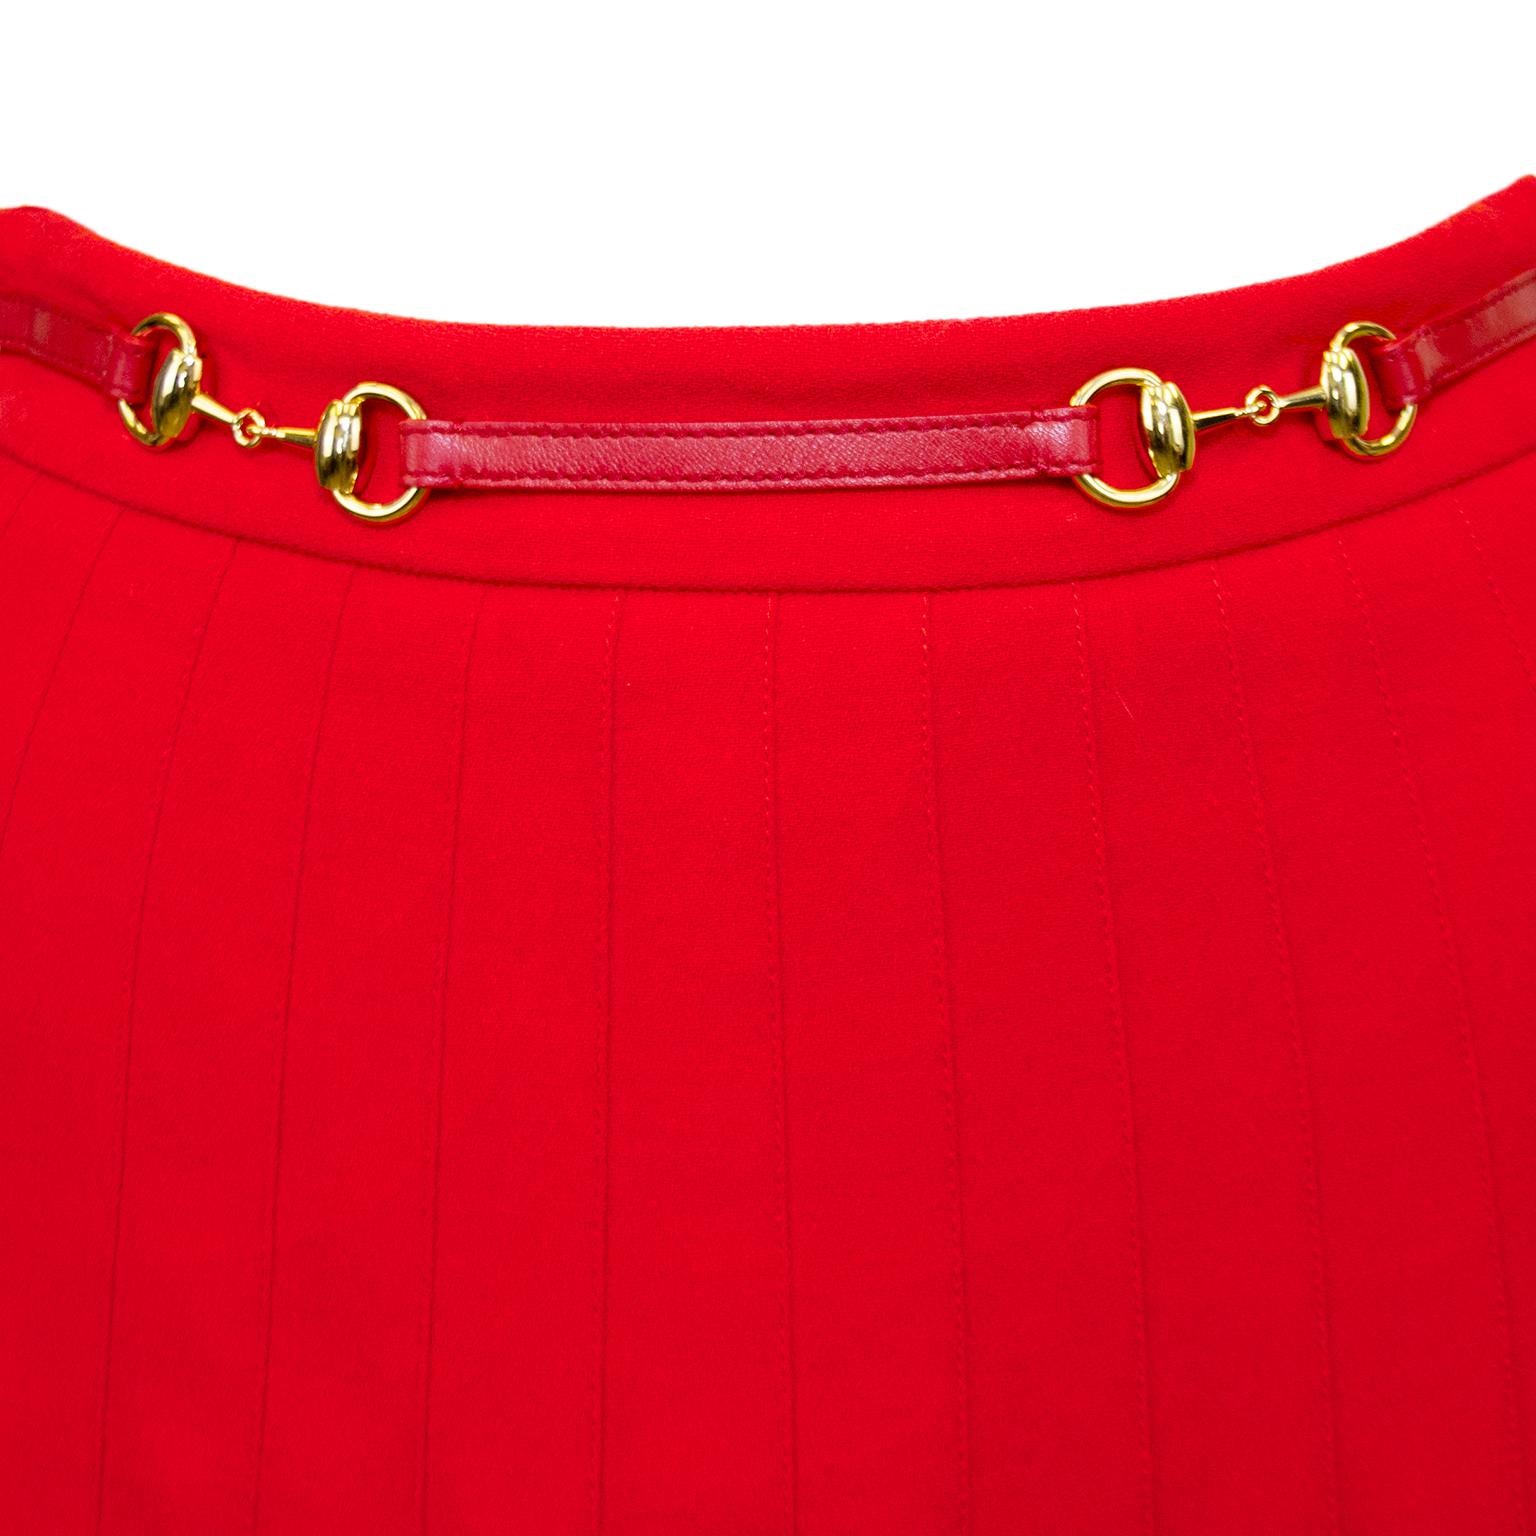 2020's Gucci Red Pleated Skirt  In Excellent Condition For Sale In Toronto, Ontario